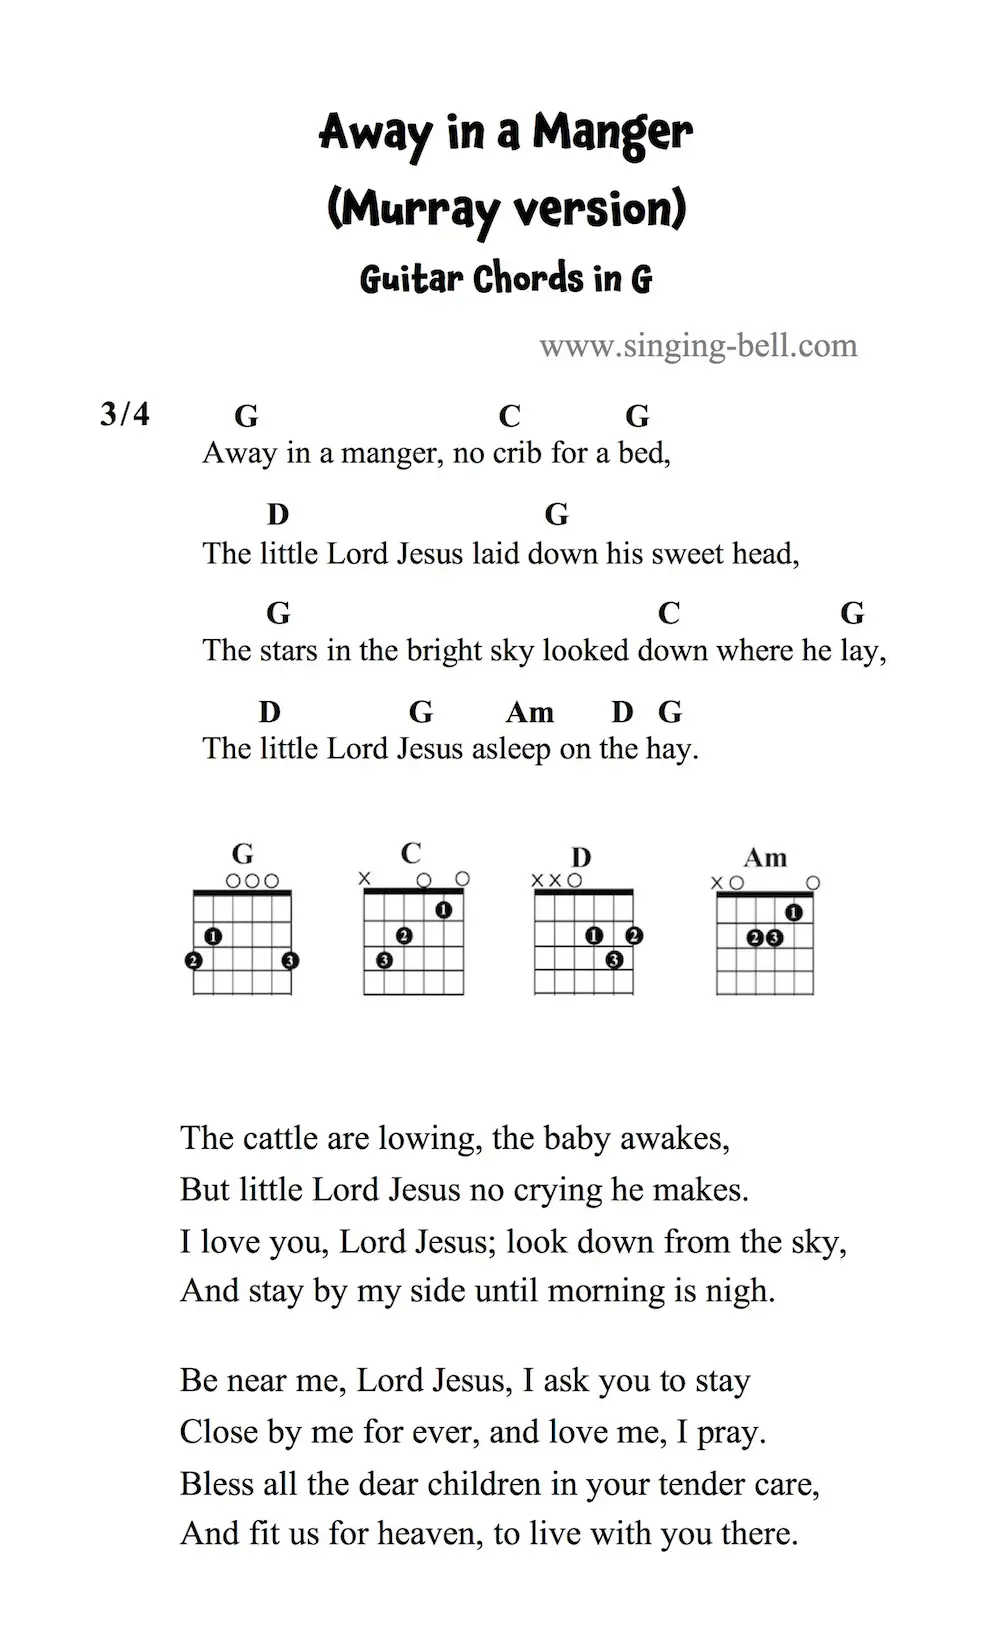 Away in a manger - Guitar Chords in G (Murray's Version)